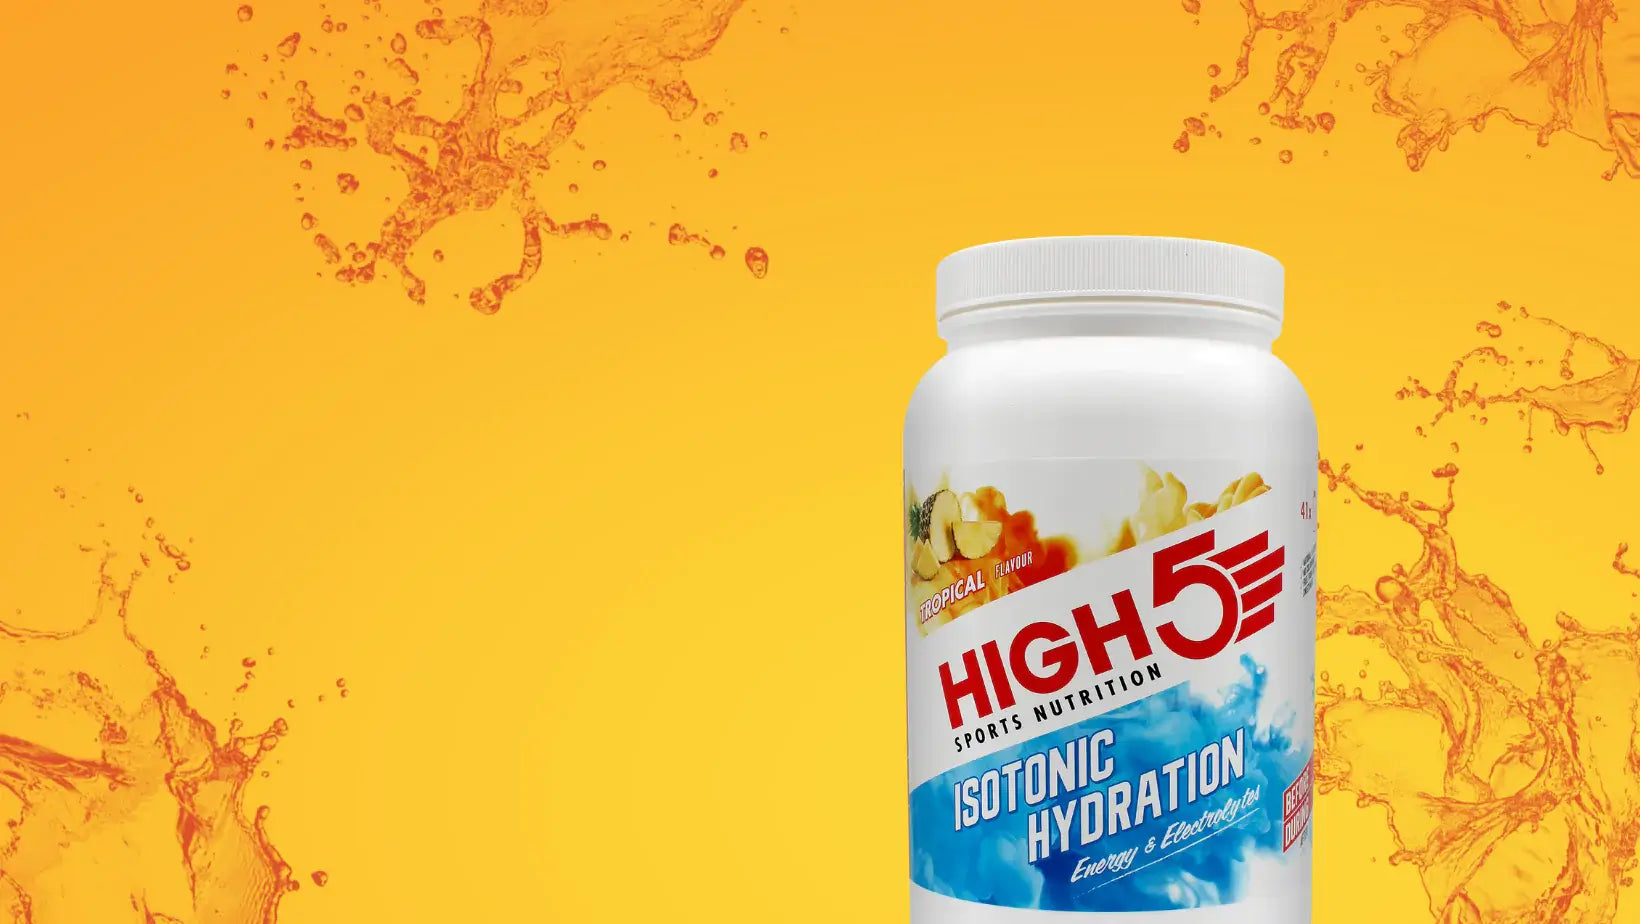 New Product Launch: Refresh your workout with new Isotonic Hydration